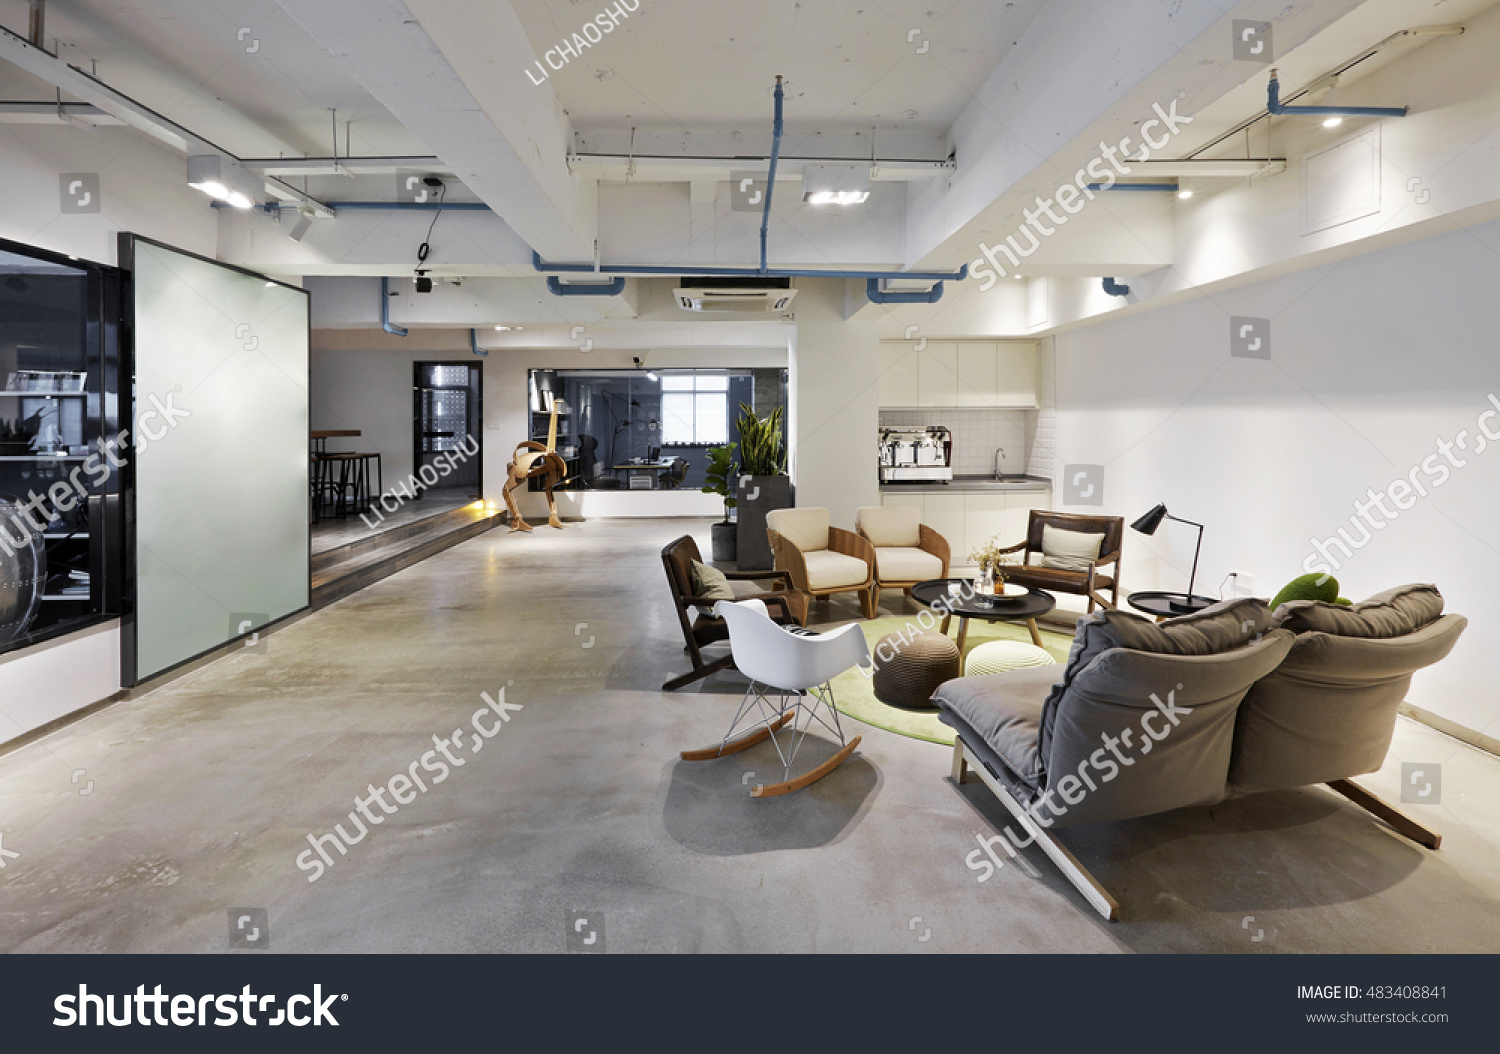 Fashion and modern office interiors #483408841